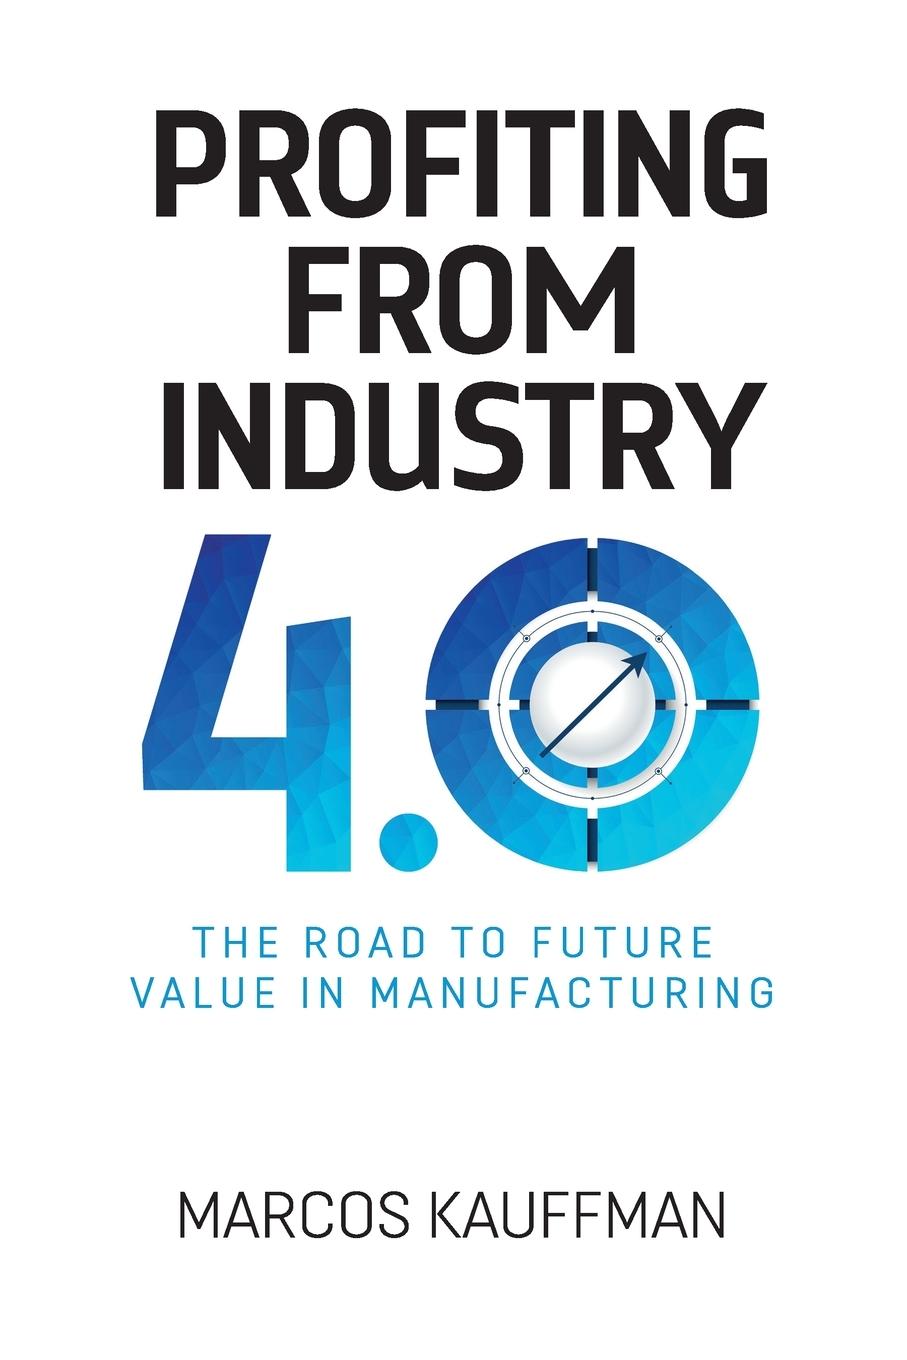 Kniha Profiting from Industry 4.0 